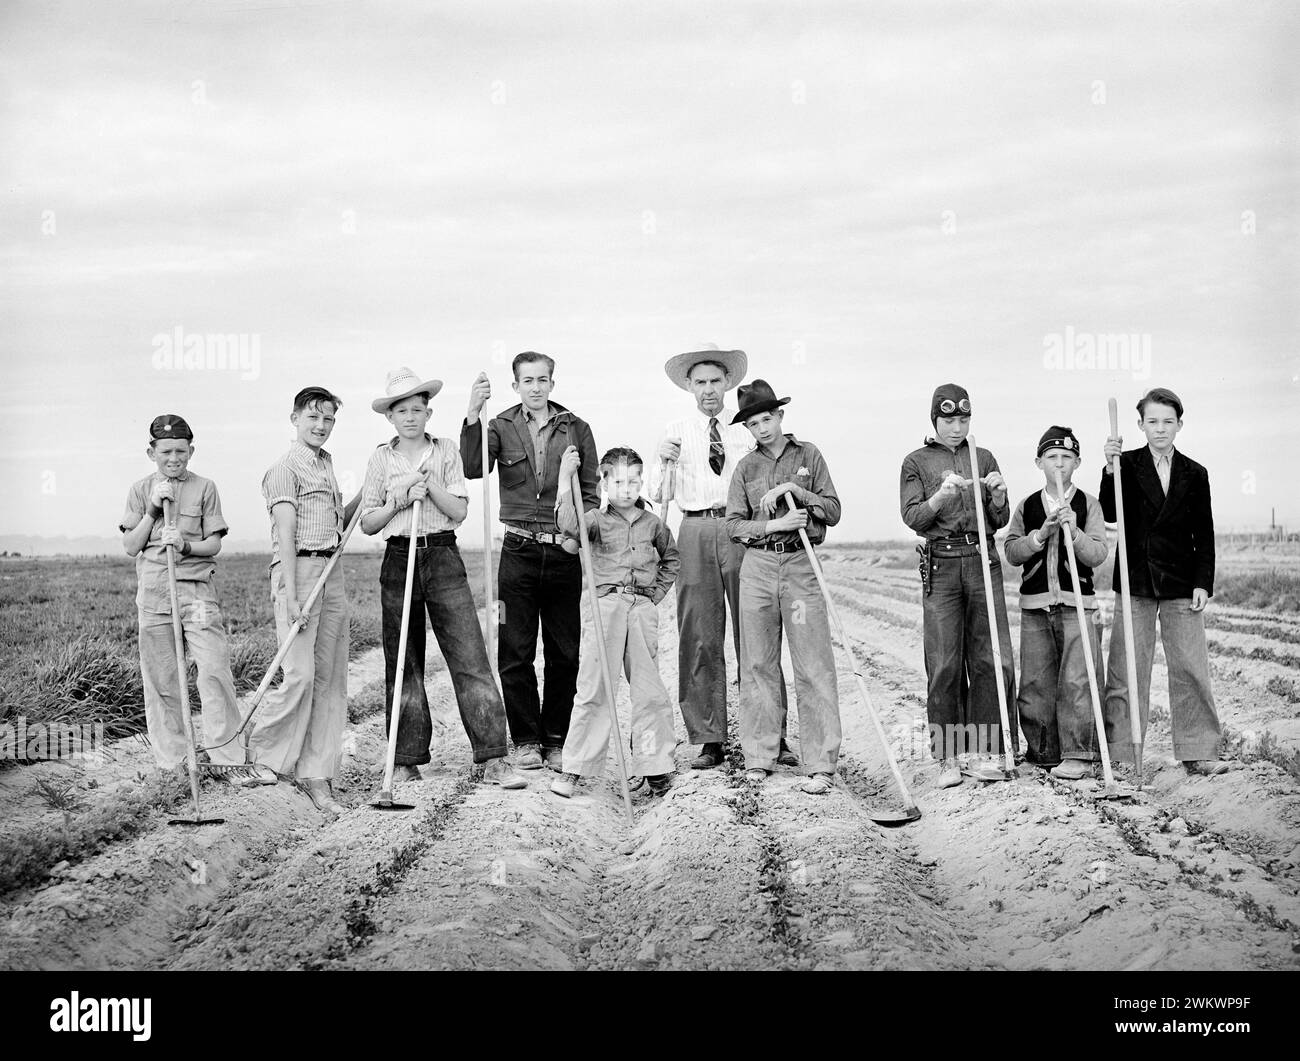 Boys learning to garden in vocational training class provided for in the Smith-Hughes bill, FSA (Farm Security Administration) farm workers' community, Eleven Mile Corner, Arizona, USA, Russell Lee, U.S. Farm Security Administration, February 1942 Stock Photo